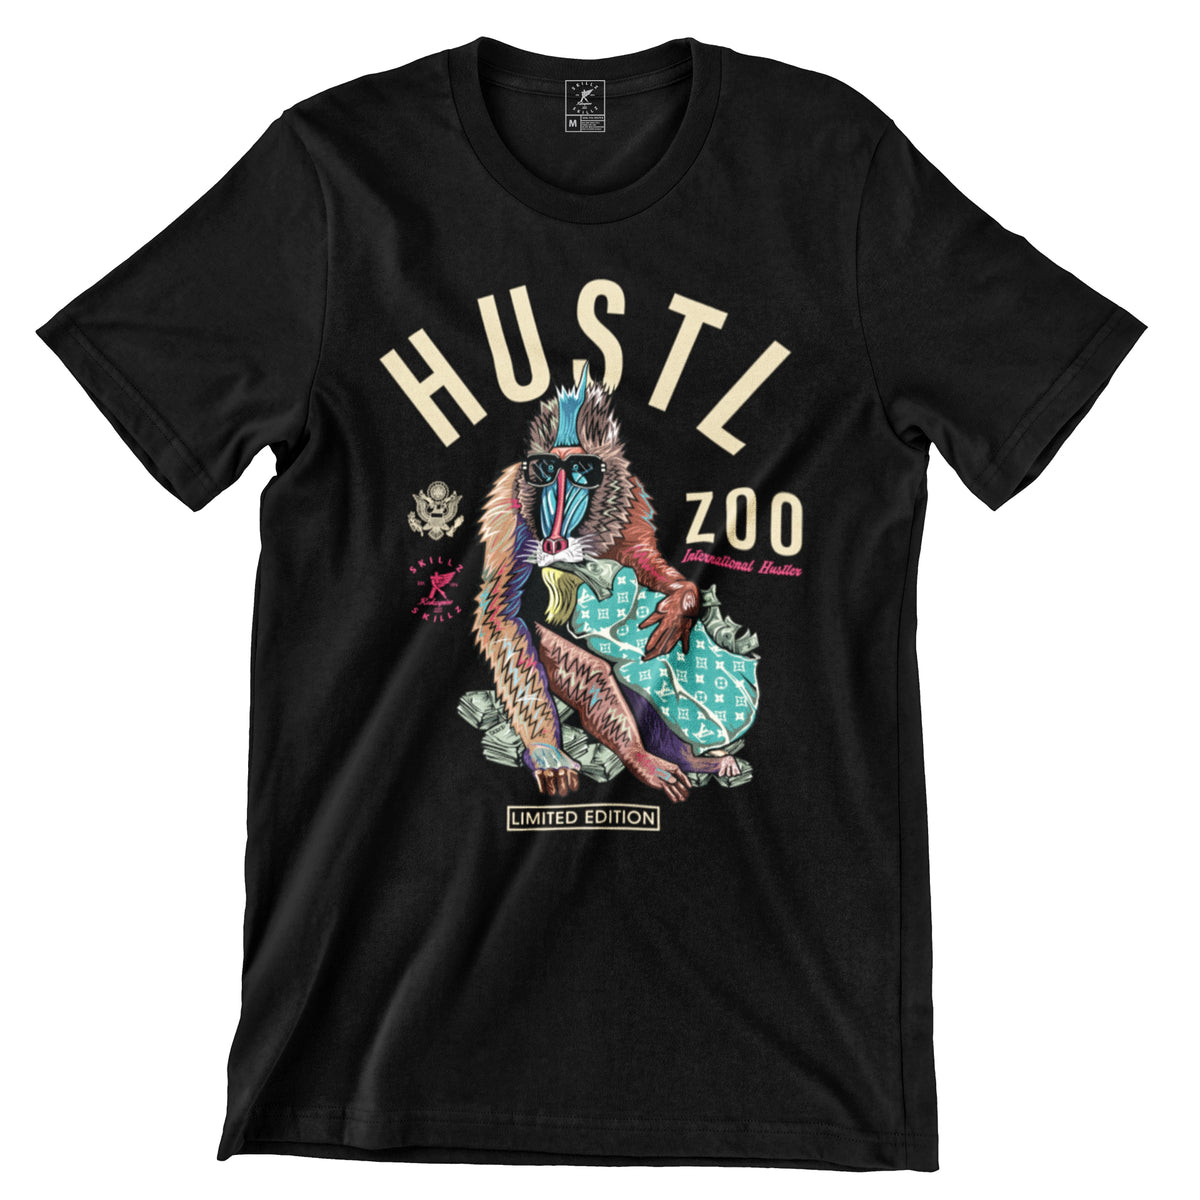 "Hustlers Zoo BLK" Limited Edition Tee